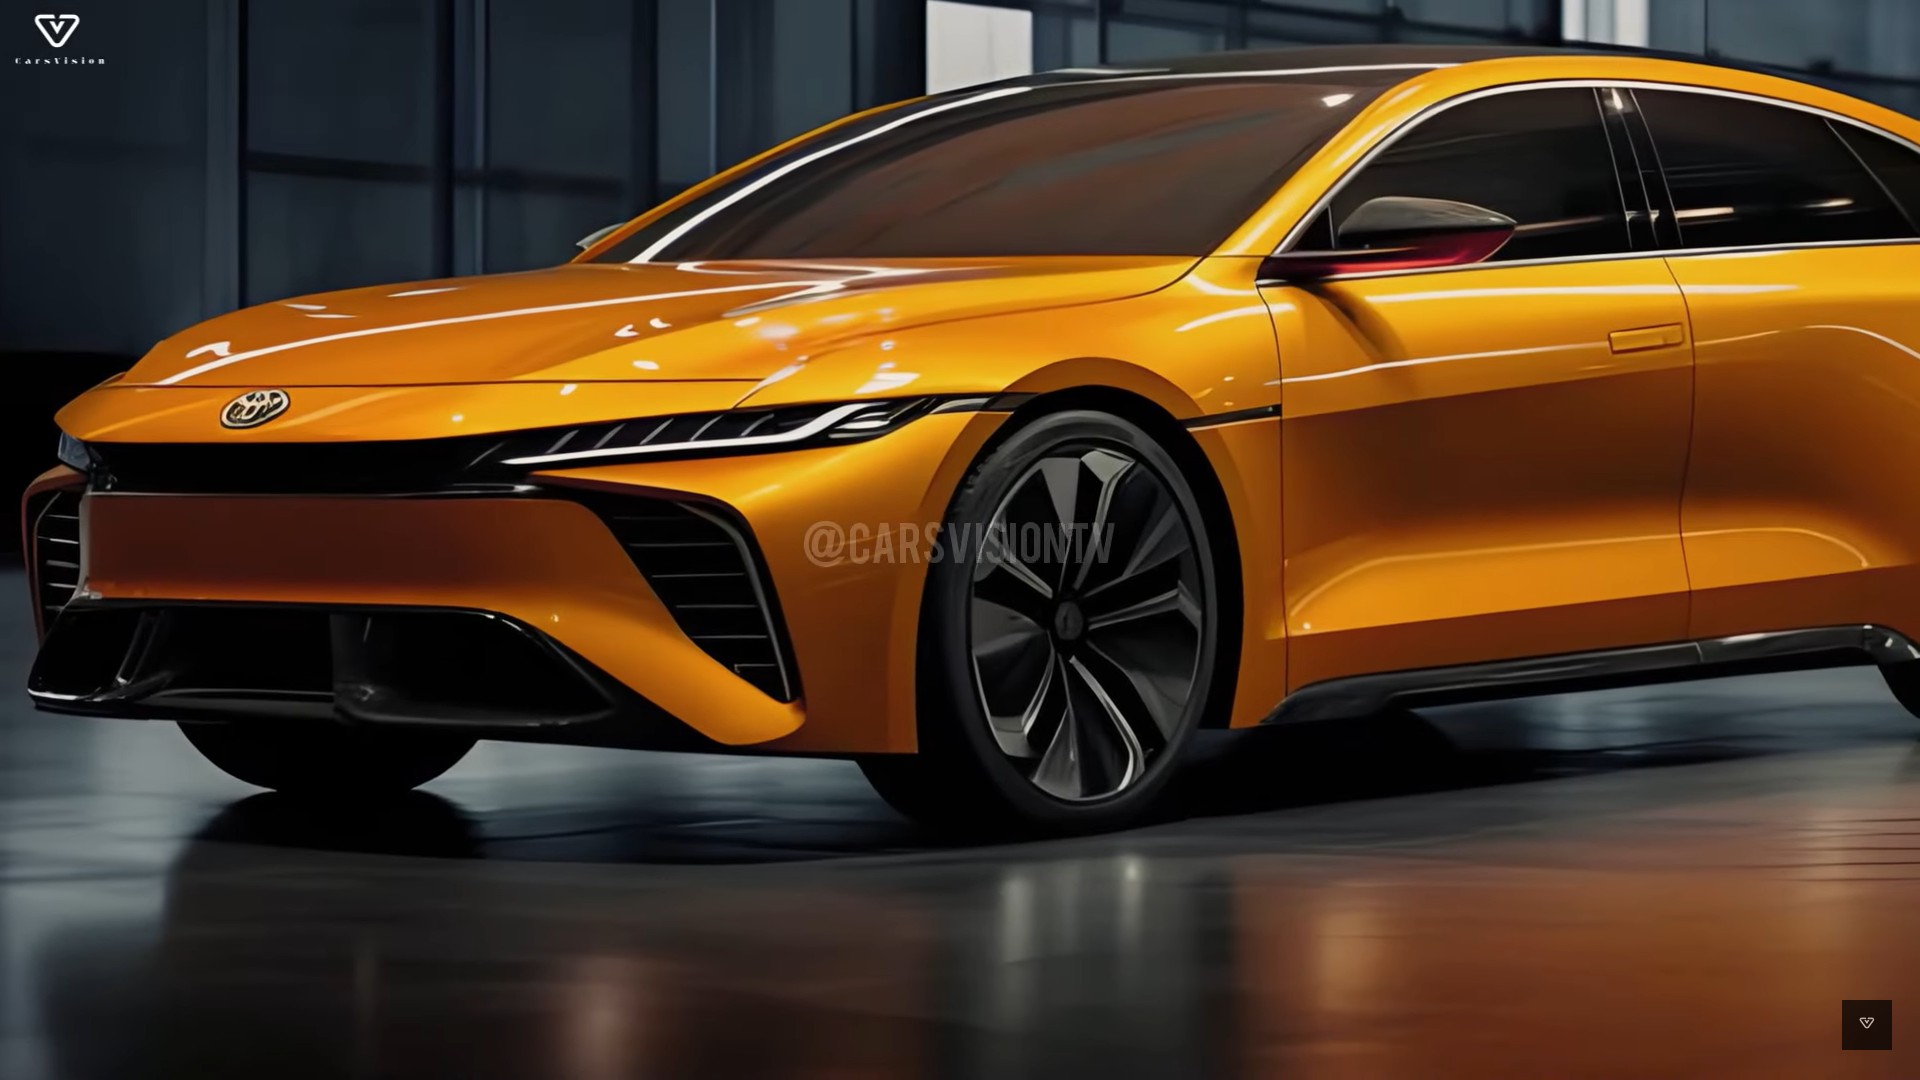 next-gen-2025-toyota-corolla-fastback-redesign-appears-stylish-and-modern-in-cgi-6.jpg